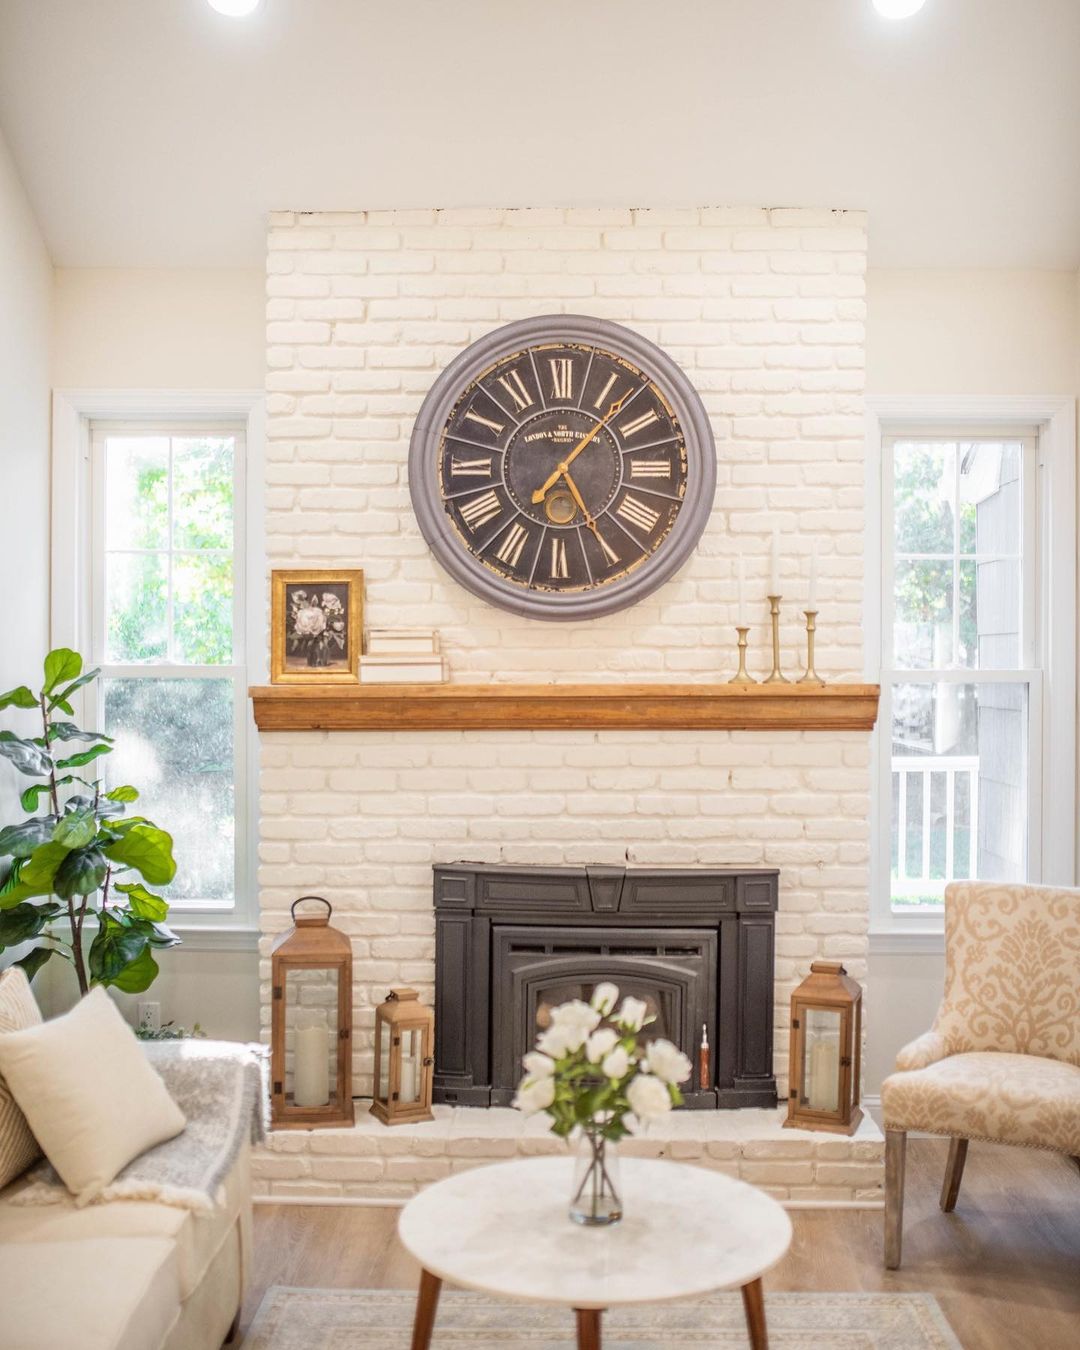 Classic Charm with a Vintage Clock